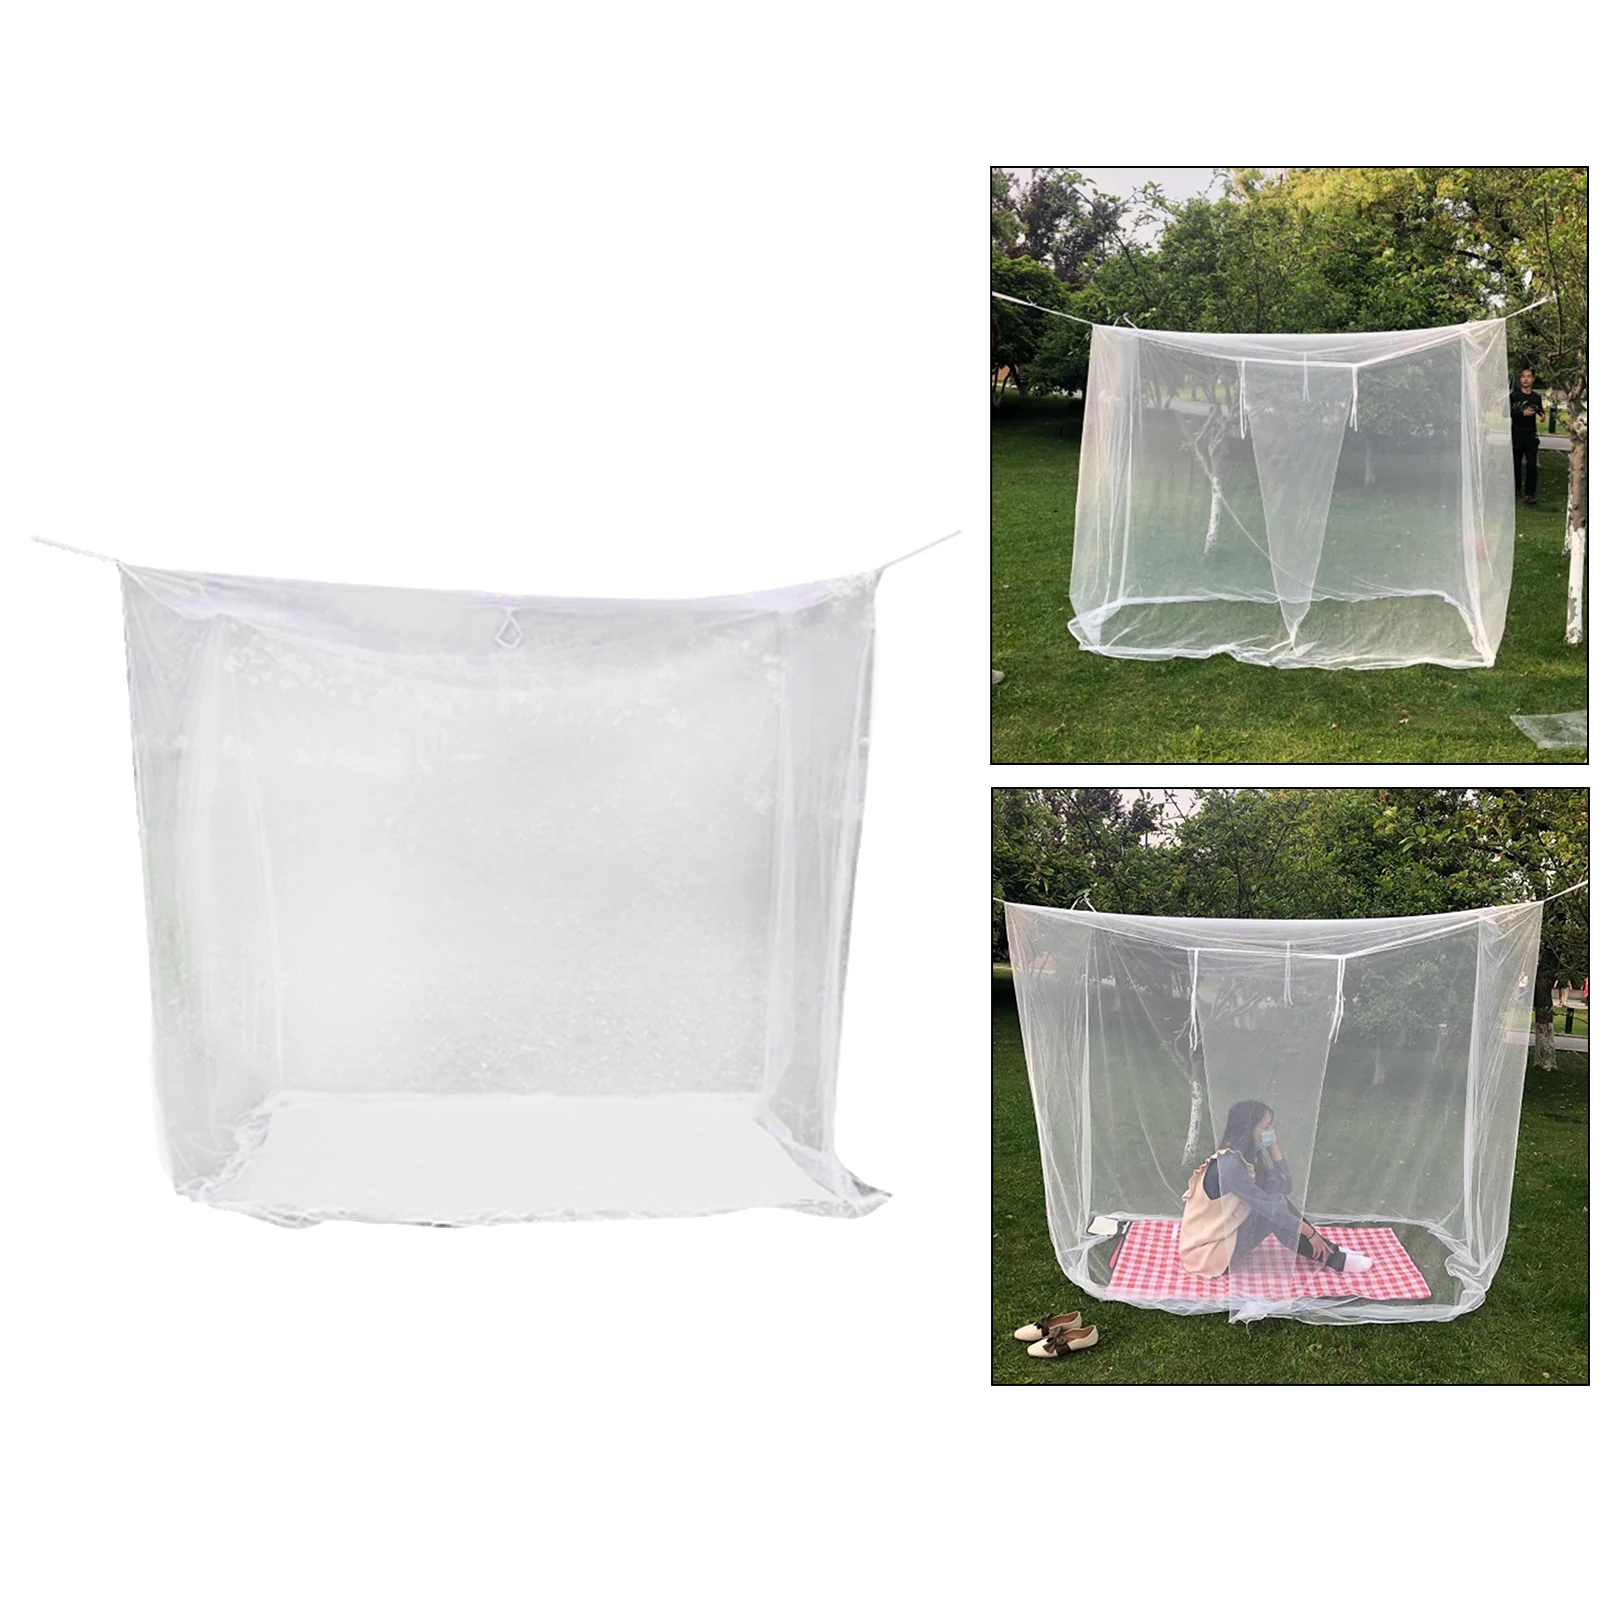 Mosquito Net White Large Camping Canopy Repellent Tent Household Bed Net